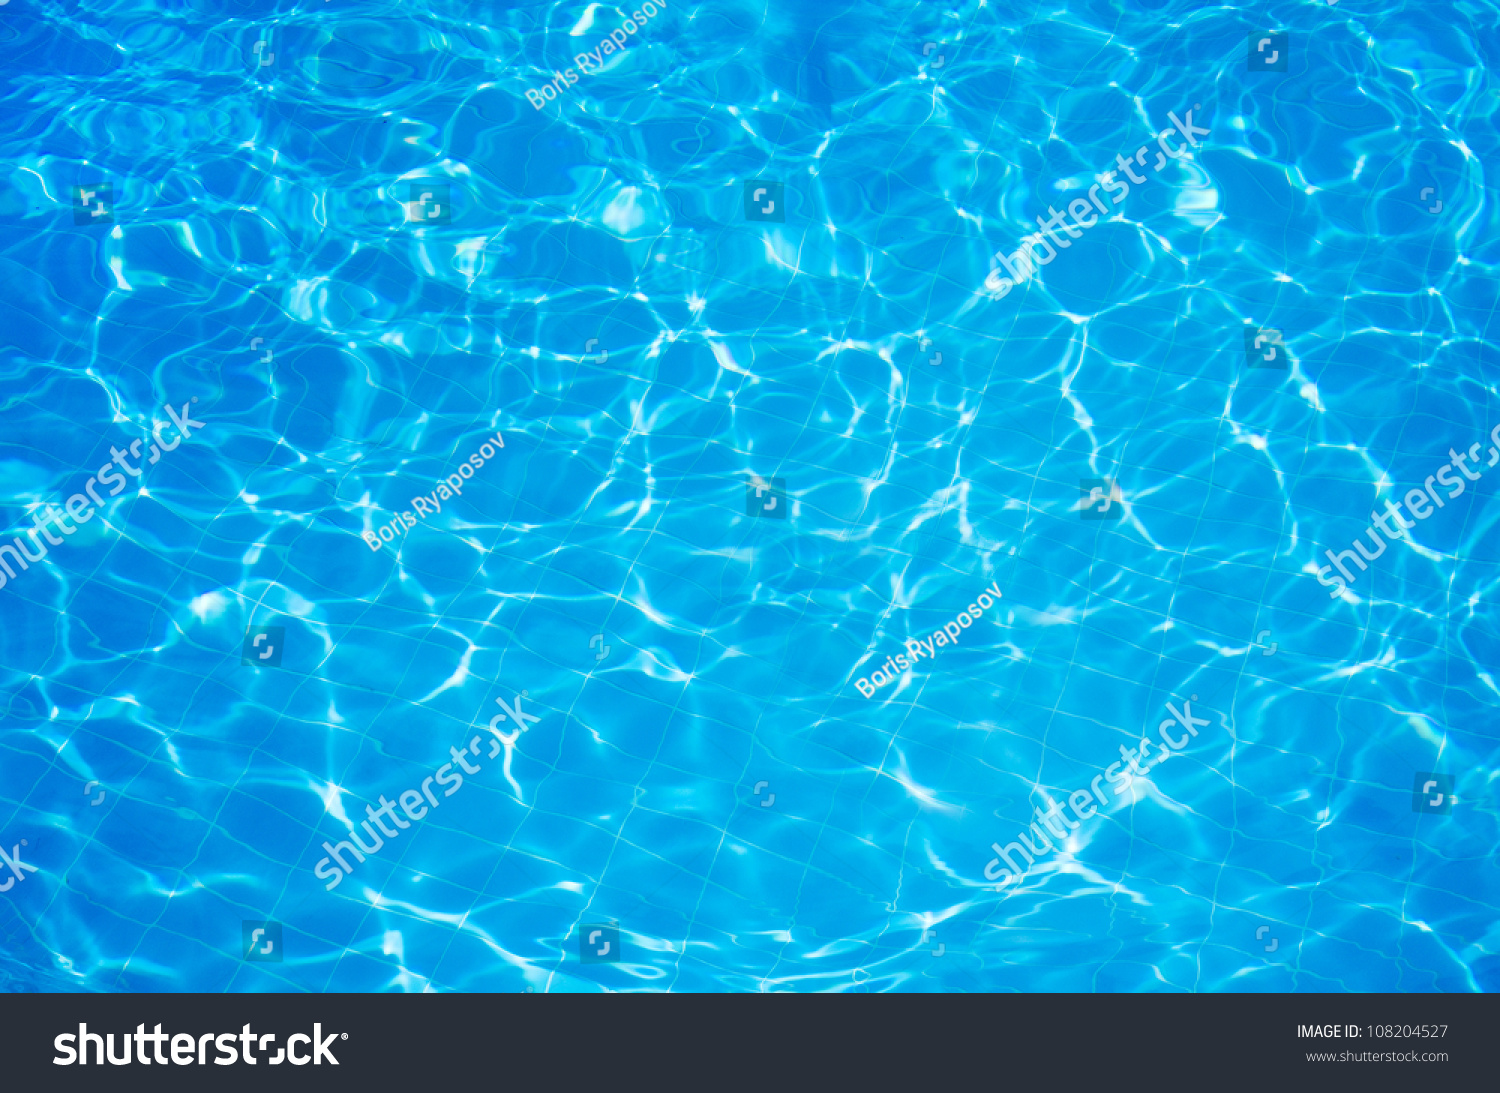 Blue ripped water in swimming pool #108204527